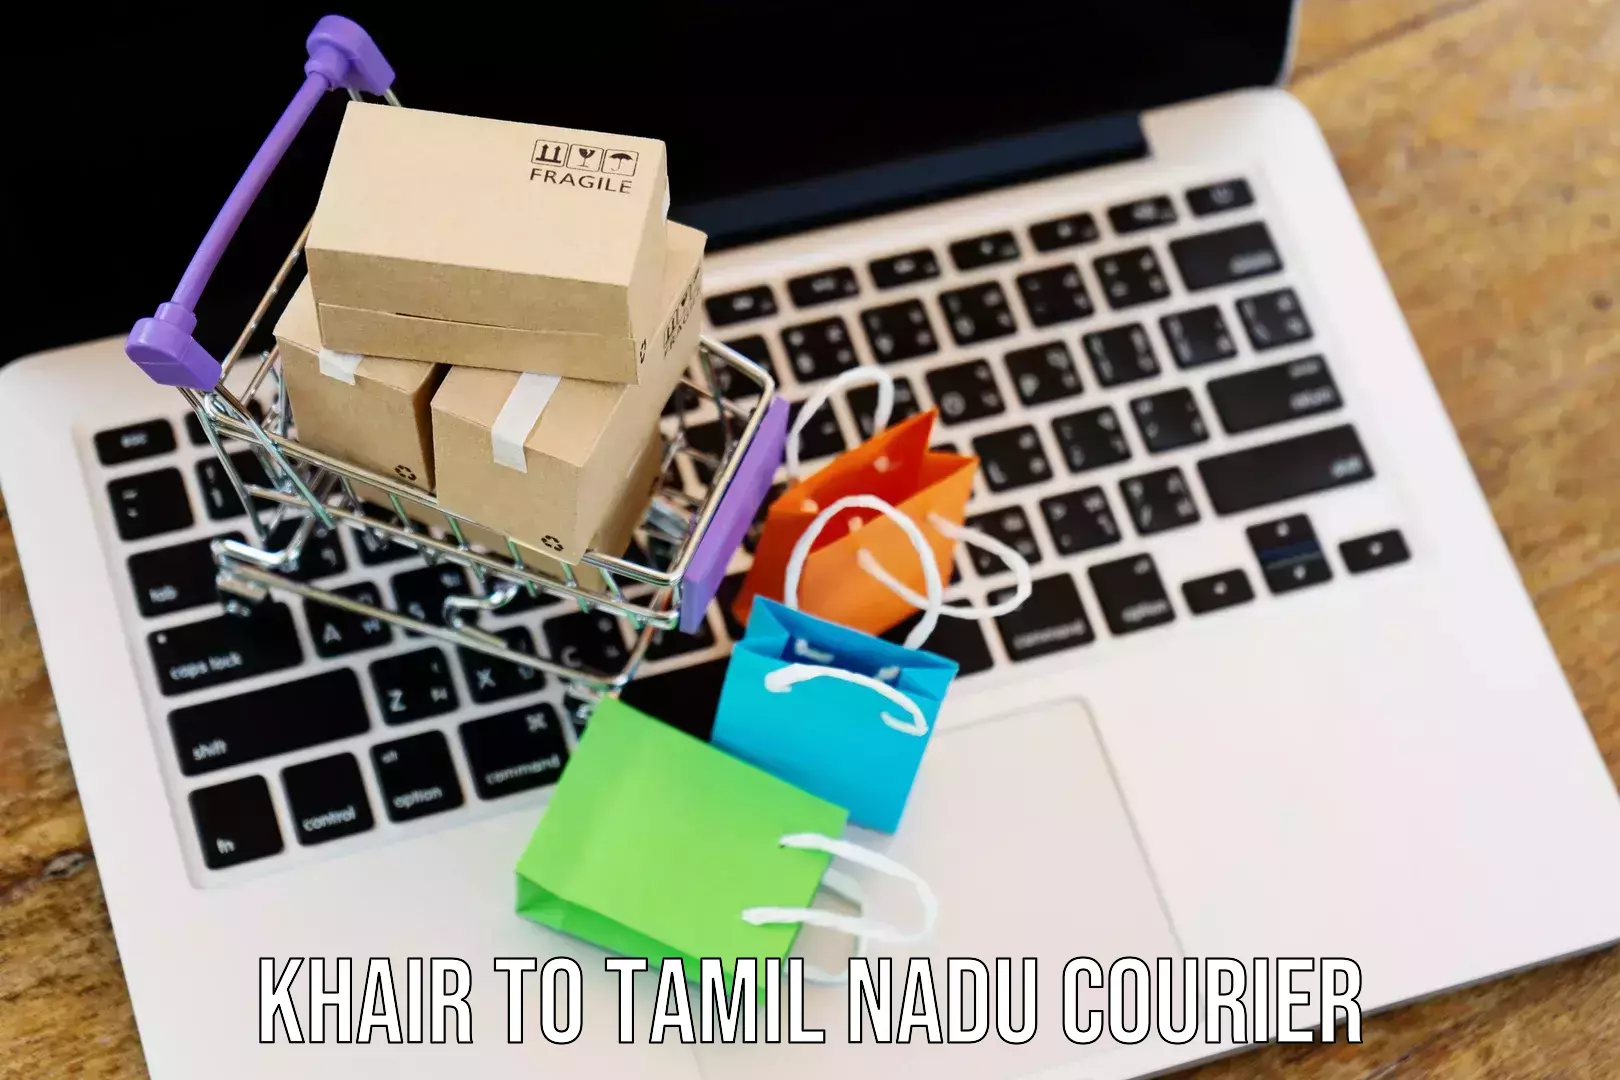 Supply chain delivery in Khair to Tamil Nadu